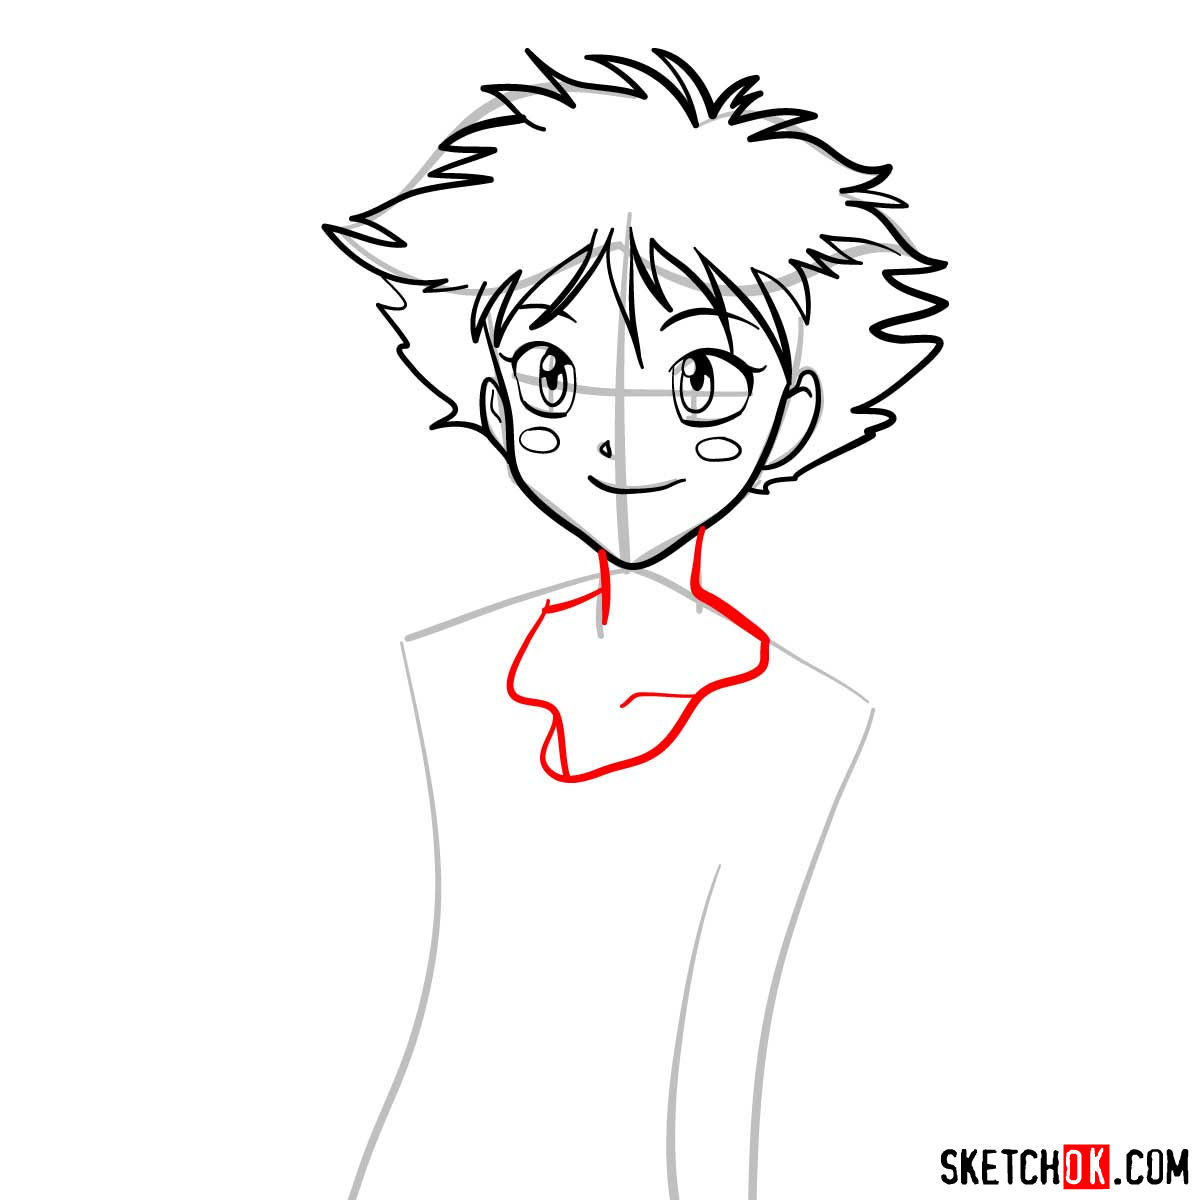 How to draw Ed from Cowboy Bebop anime - step 06